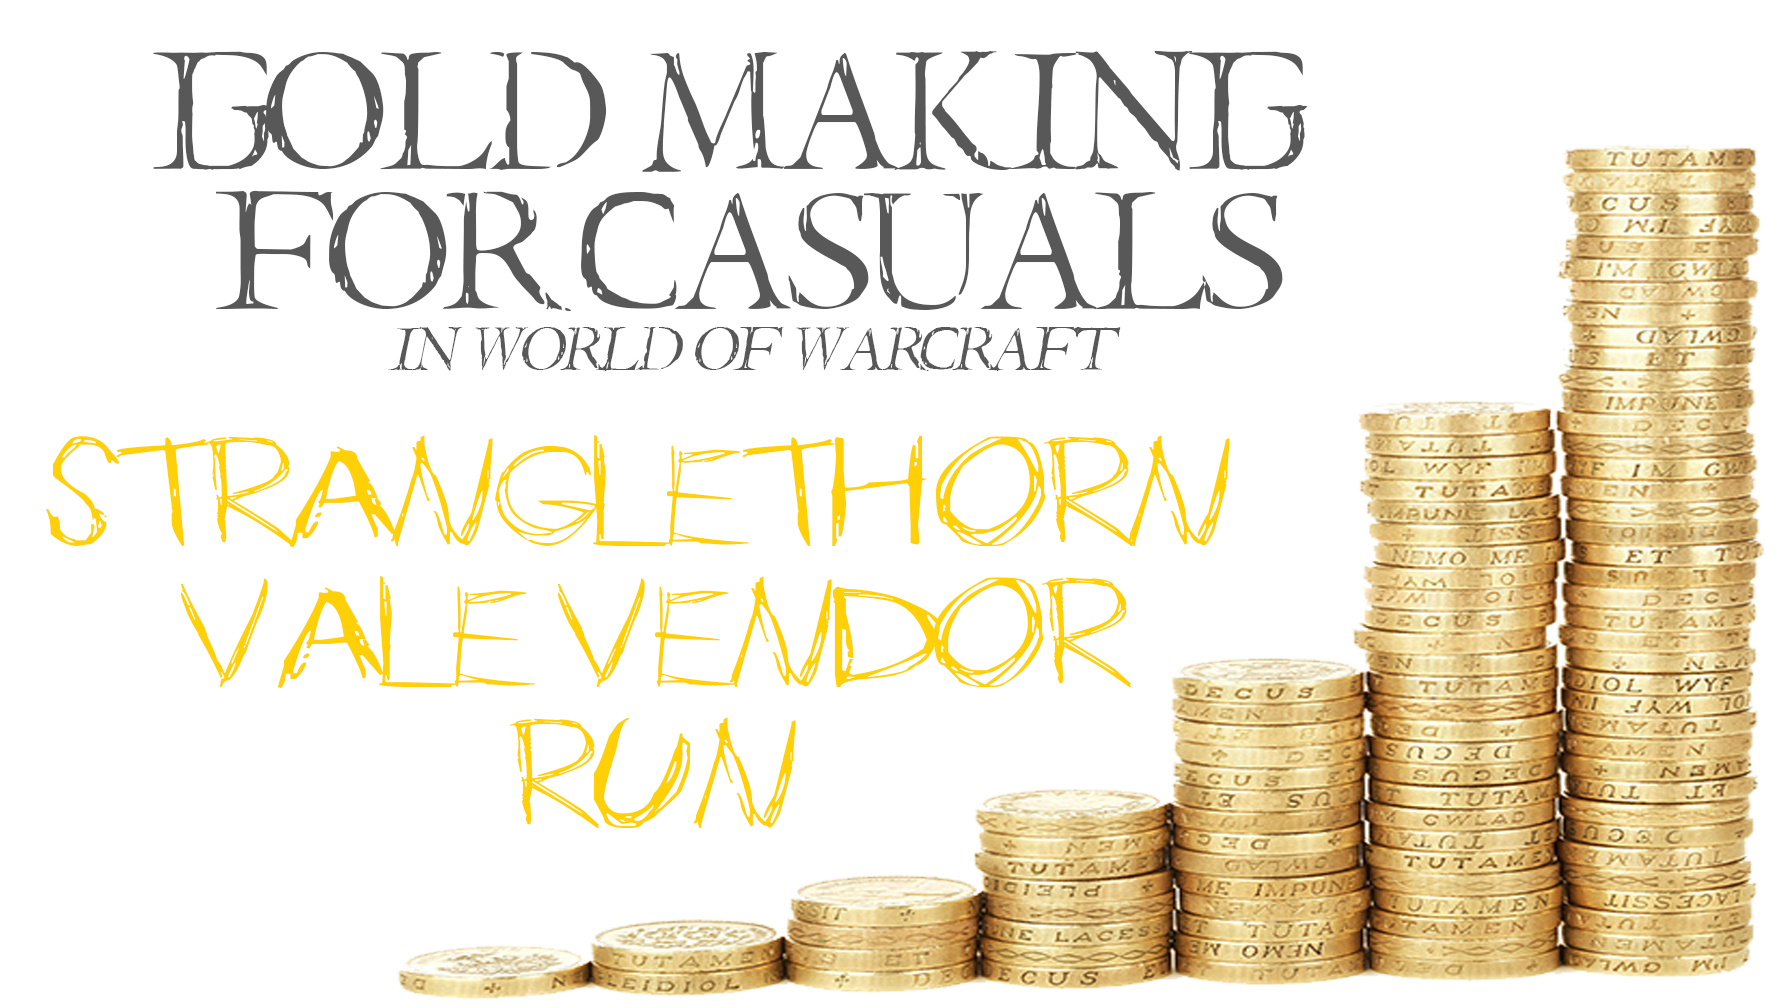 Stranglethorn Vale Vendors Run. Gold making for Casual is a series of gold making tips for Warcraft players that want to make some extra gold easily.